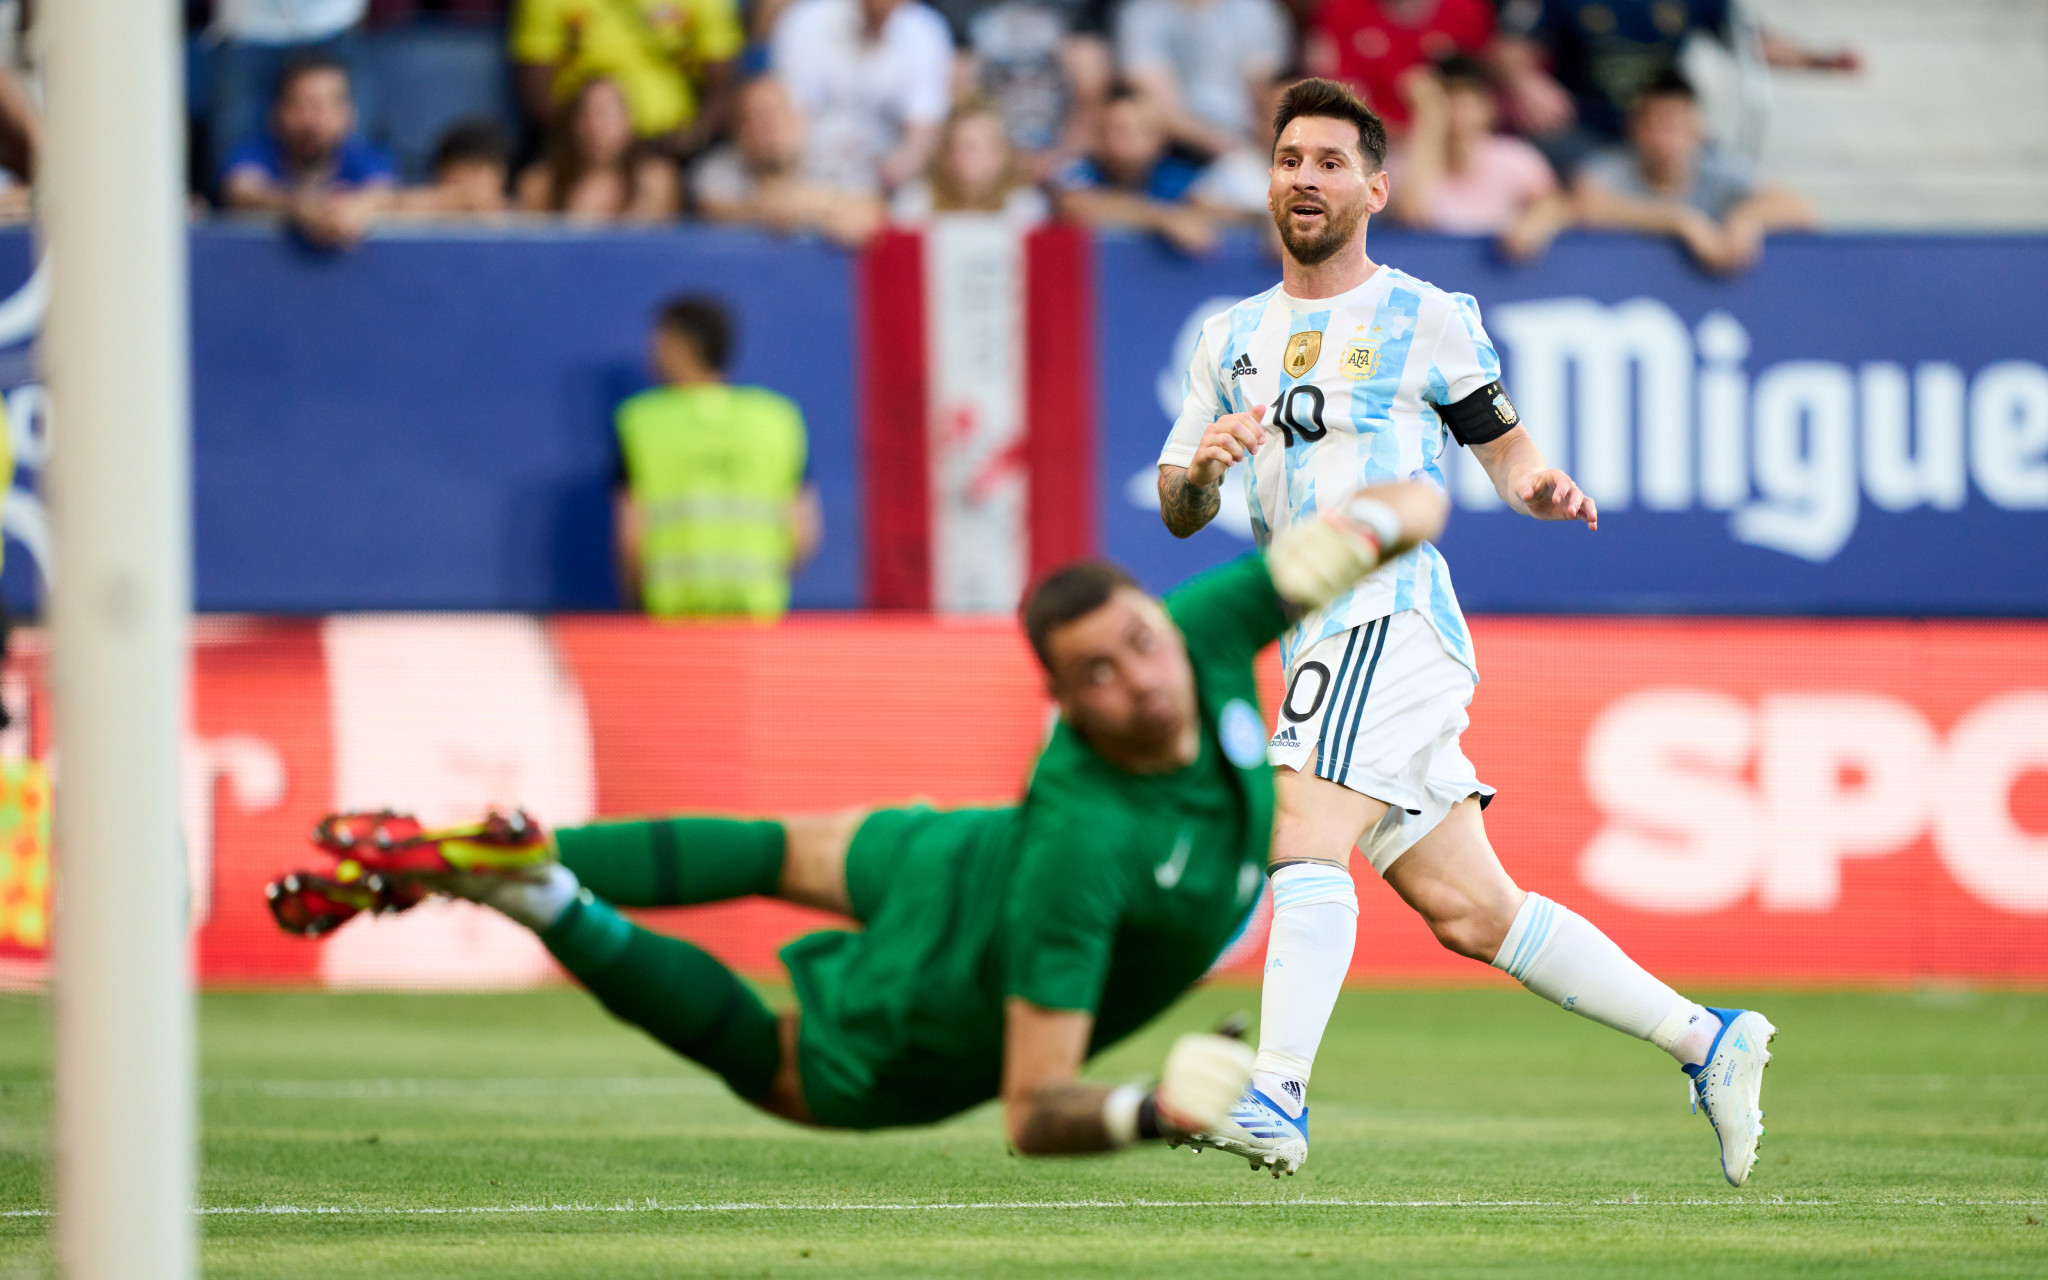 Argentina's Lionel Messi is in outstanding form at the moment - scoring all five of his team's goals in a 5-0 victory over Estonia - but will have to wait until November for the FIFA World Cup to start ©Getty Images